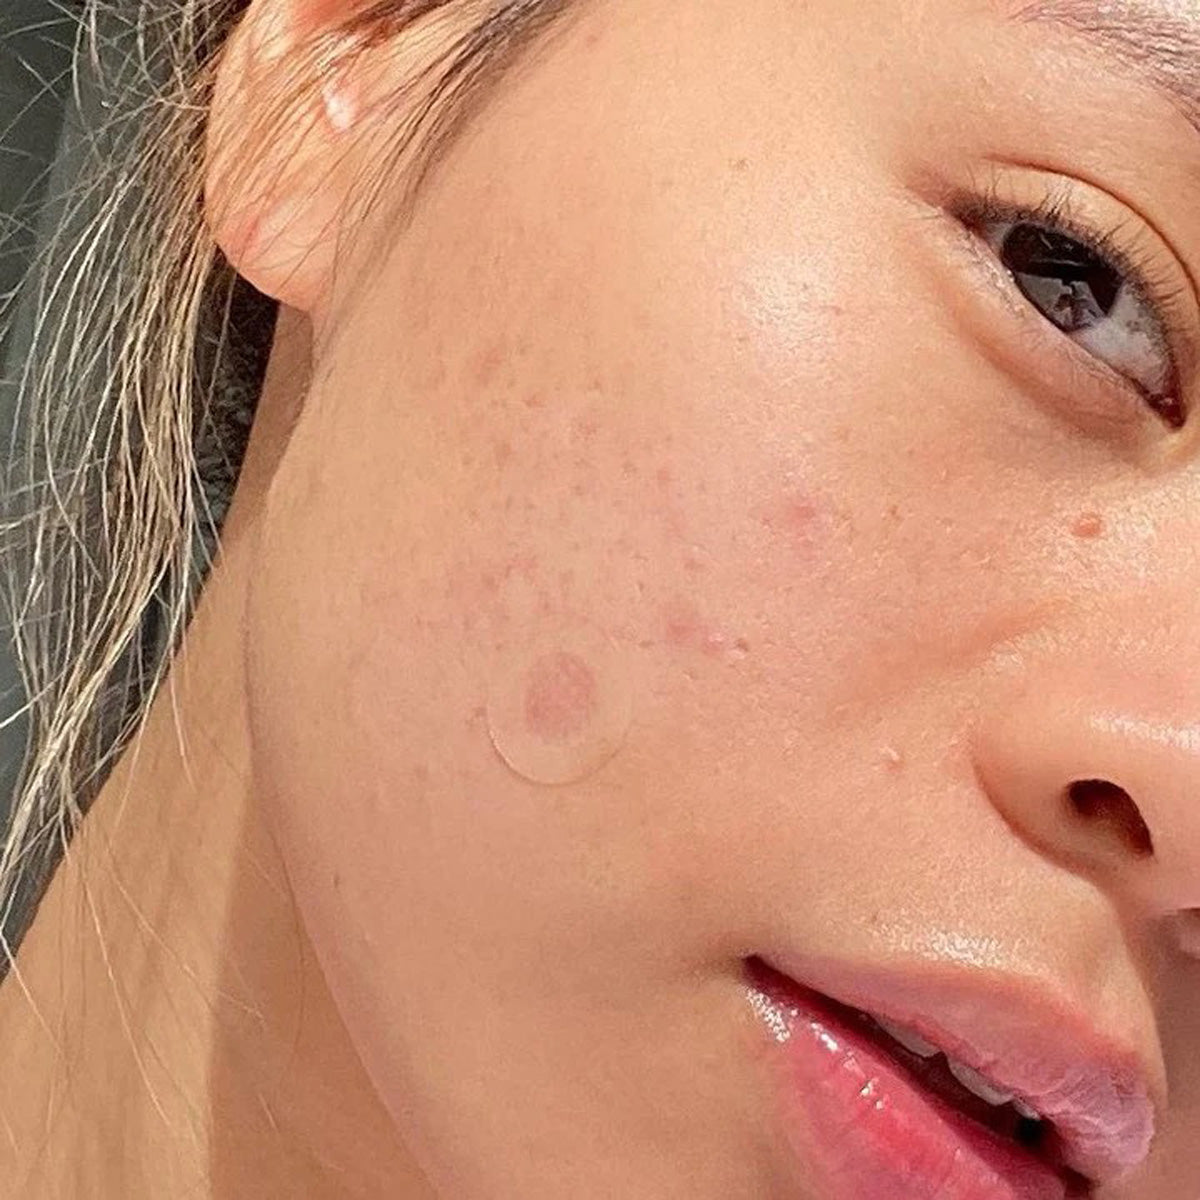 Important: Do You Know What Kind of Zit You Have?